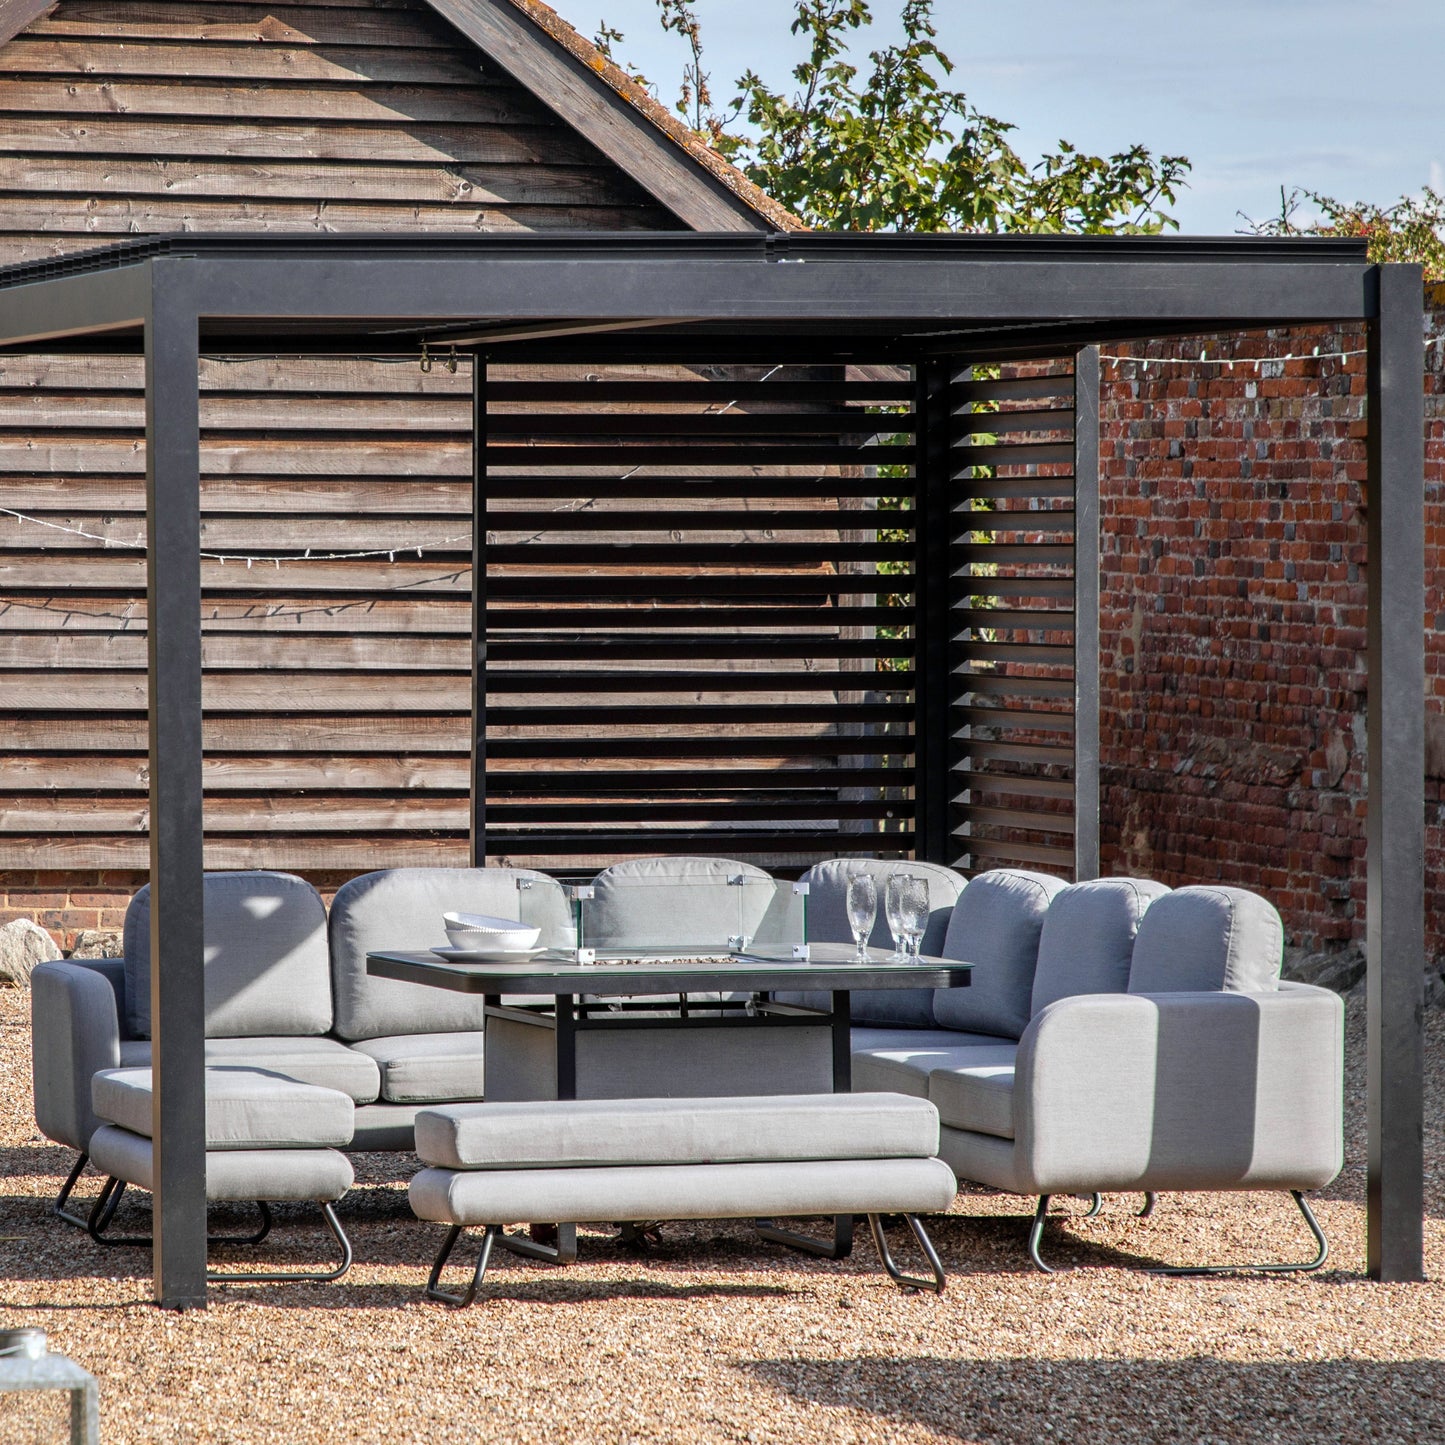 A Dittisham Pergola Louvre Screen Black 1230x2180mm by Kikiathome.co.uk enhancing home furniture with a table and chairs.